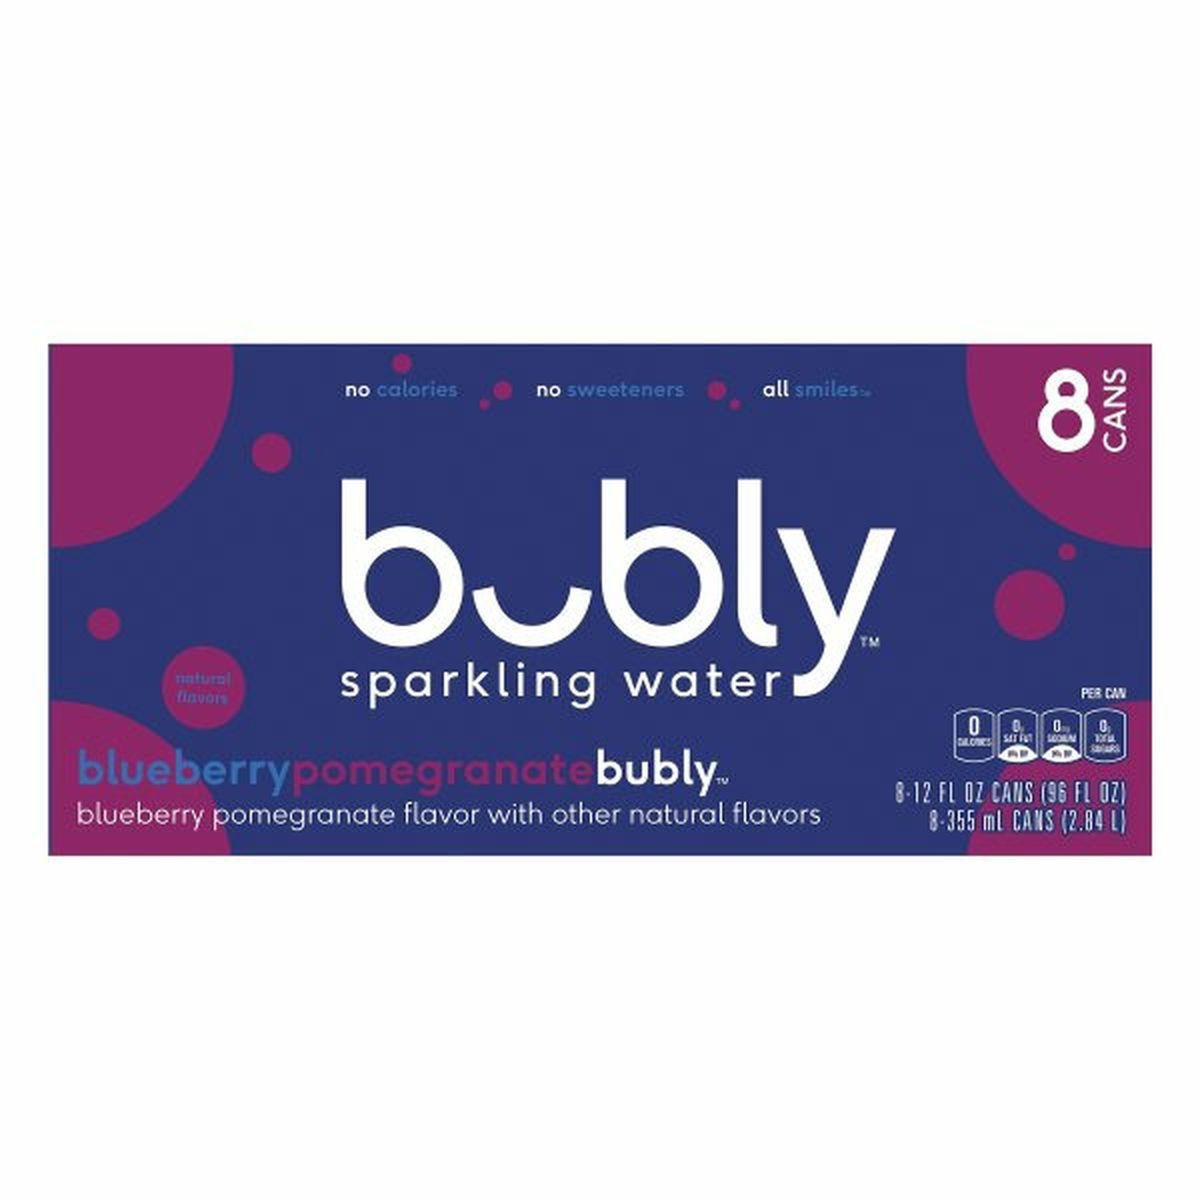 Calories in bubly Sparkling Water, Blueberry Pomegranate